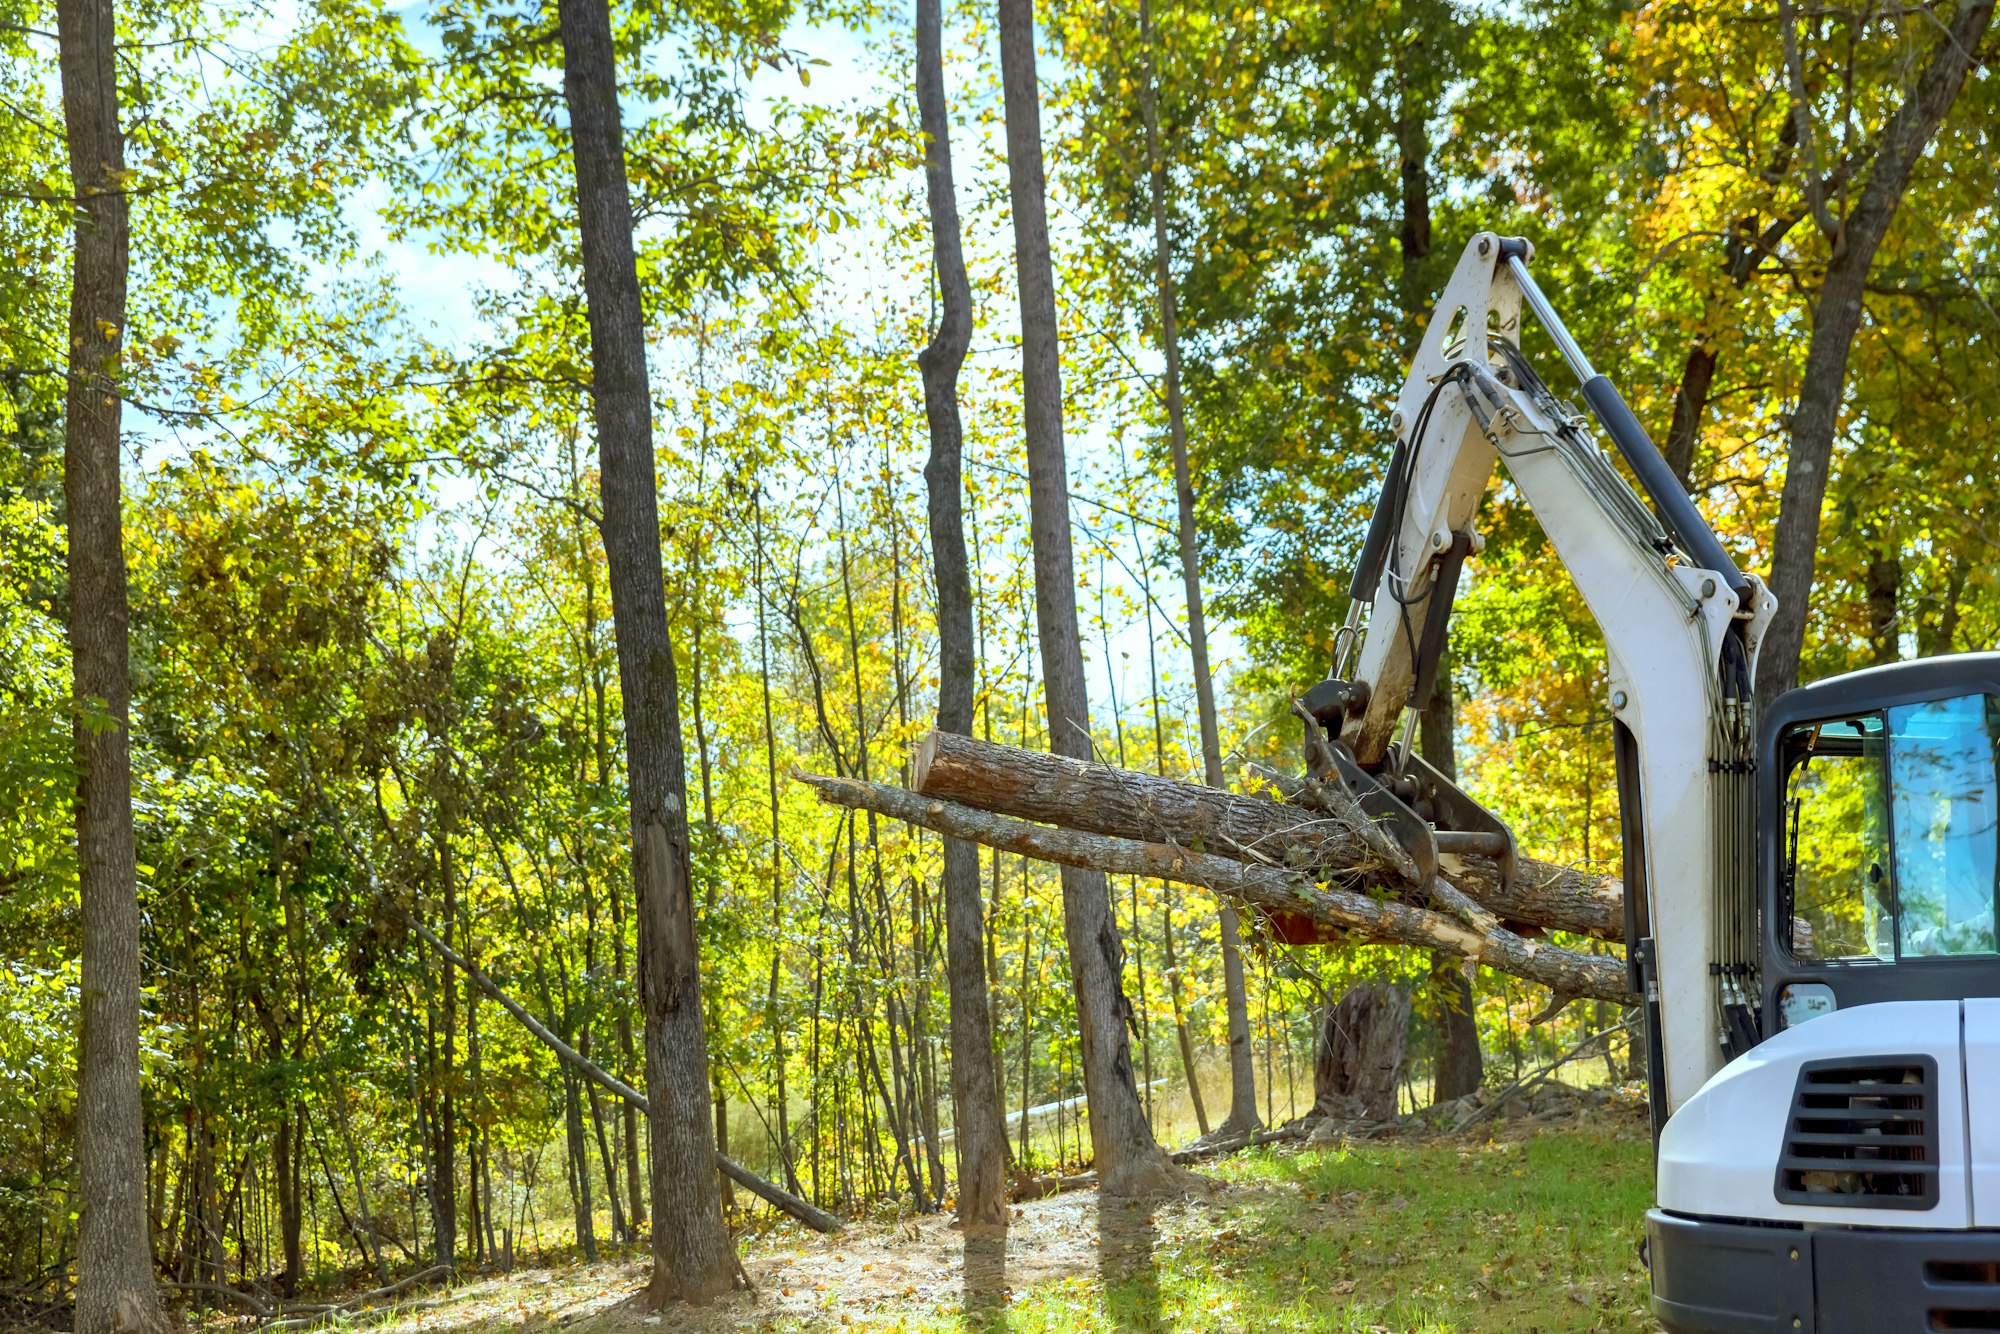 Landscaping for housing complex: tractor skid steer clears trees during construction